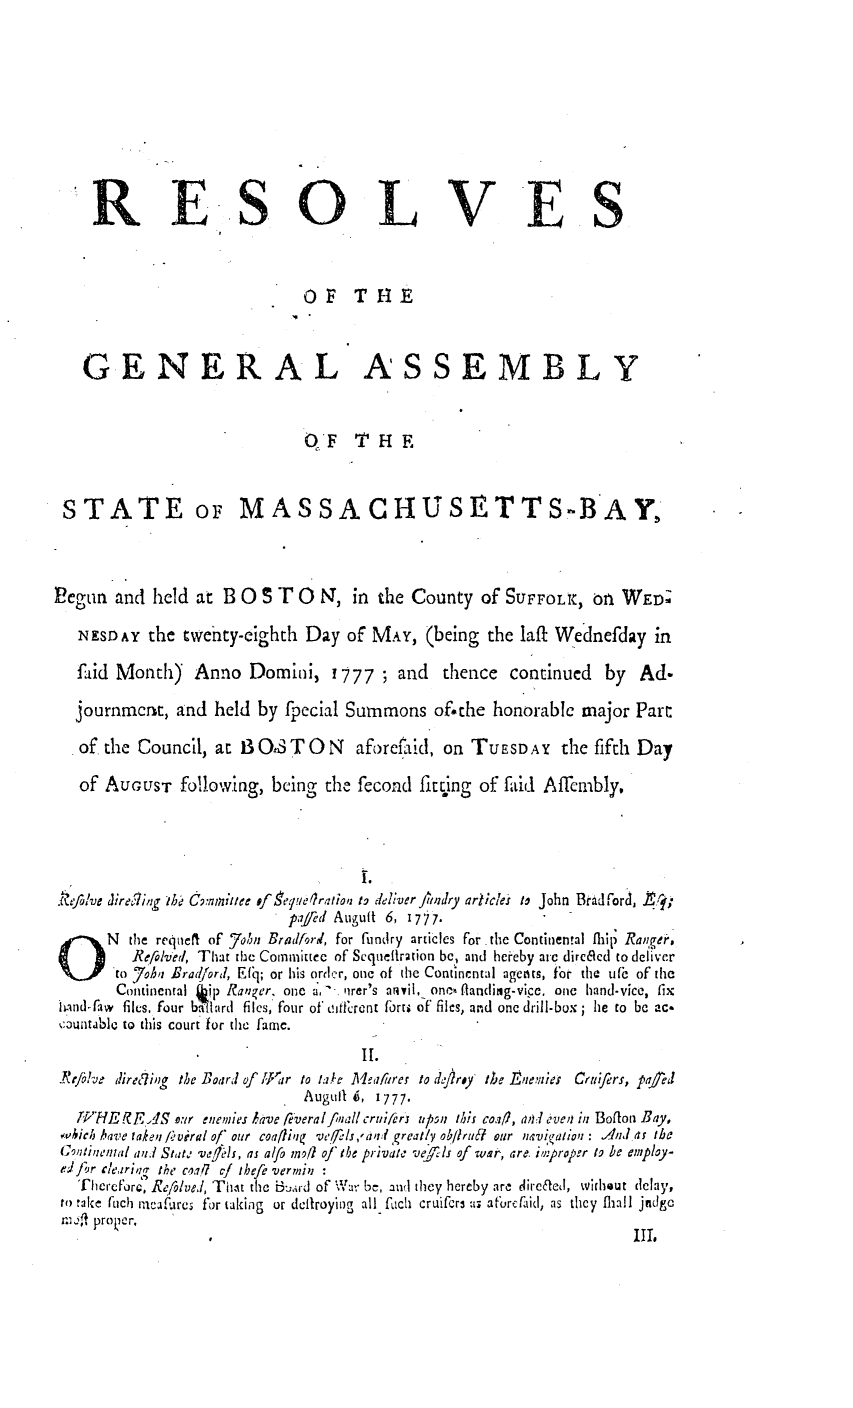 handle is hein.ssl/ssma0214 and id is 1 raw text is: 'RESOLVES
oF T F1E
GENERAL ASSEMBLY
OF THE
STATE oF MASSACHUSETTS.-BAY,
Pegun and held at B 0 $ T 0 N, in the County of SUFFOLIC, On WED;
NESDAY the twenty-eighth Day of MAY, (being the laft Wednefday in
faid Month) Anno Domini, 1777 ; and               thence continued      by   Ad.
journrncrt, and held by fpecial Summons of.the honorable major Part
of the Council, at B O,3 T O N        aforeftid, on TuESDAY       the fifth Day
of AUGUST following, being the fecond fitting of faid Affinmbly,
.'efo/ve direcilg ?N C,.mhntiee o ,gee/rzltio,, to delver fiidry articlea to John Bradford,  r
pajed Auguft 6, 1777.
Nthe reqneft of 7on Bradford, for fundry articles for. the Continental fUip Ranqge,
O         .Refilved, That the Committce of Sequeltration be, and heieby arc direacd to deliver
to 7oha Brad/orl, Ef ; or his order, one of the Continental agents, fbr the tife of the
Continental  ip Raner. one a,-. lirer's anvil, onc', flanling-vice., one hand-vicc, fix
hand-faw files, four balard files, four of oirent fort of files, and one drill-box ; he to be ac-
countable to this court for the farne.
II.
_k/five tirejing the Board of /JTar to take Alleafhrer to dj/rsy tbe E ne'wes Cruifirs, pa ed
Augullt g, 1777.
;PHEgEAS. our enewies lave fieveral fwall cru;fers tpt thI c.oa/, api:i ave/i in Boalon Bay,
wbich have taken /:,viral of our coagi,  v,,7.ls,.avd greatly ob/lruc our nsvkiation : /Al a the
C,'Itj.'fl/ a4,11 Stat' 'ved.Is, as al/o mo oJ the private vels of war, are. improper to be employ-
edJ;r cleari,i,;  the  coa,  r  ibefe verminp  :
Therefore, Re/olvet, Thit the i3:.rd of %Vat bc, and they hereby are direaeqd, without delay,
to take fuch 'incaure for taking or dcllroying all fuch cruifcr3 a;; ft'orcFaid(, as they fliall jndge
zn4l propier,


